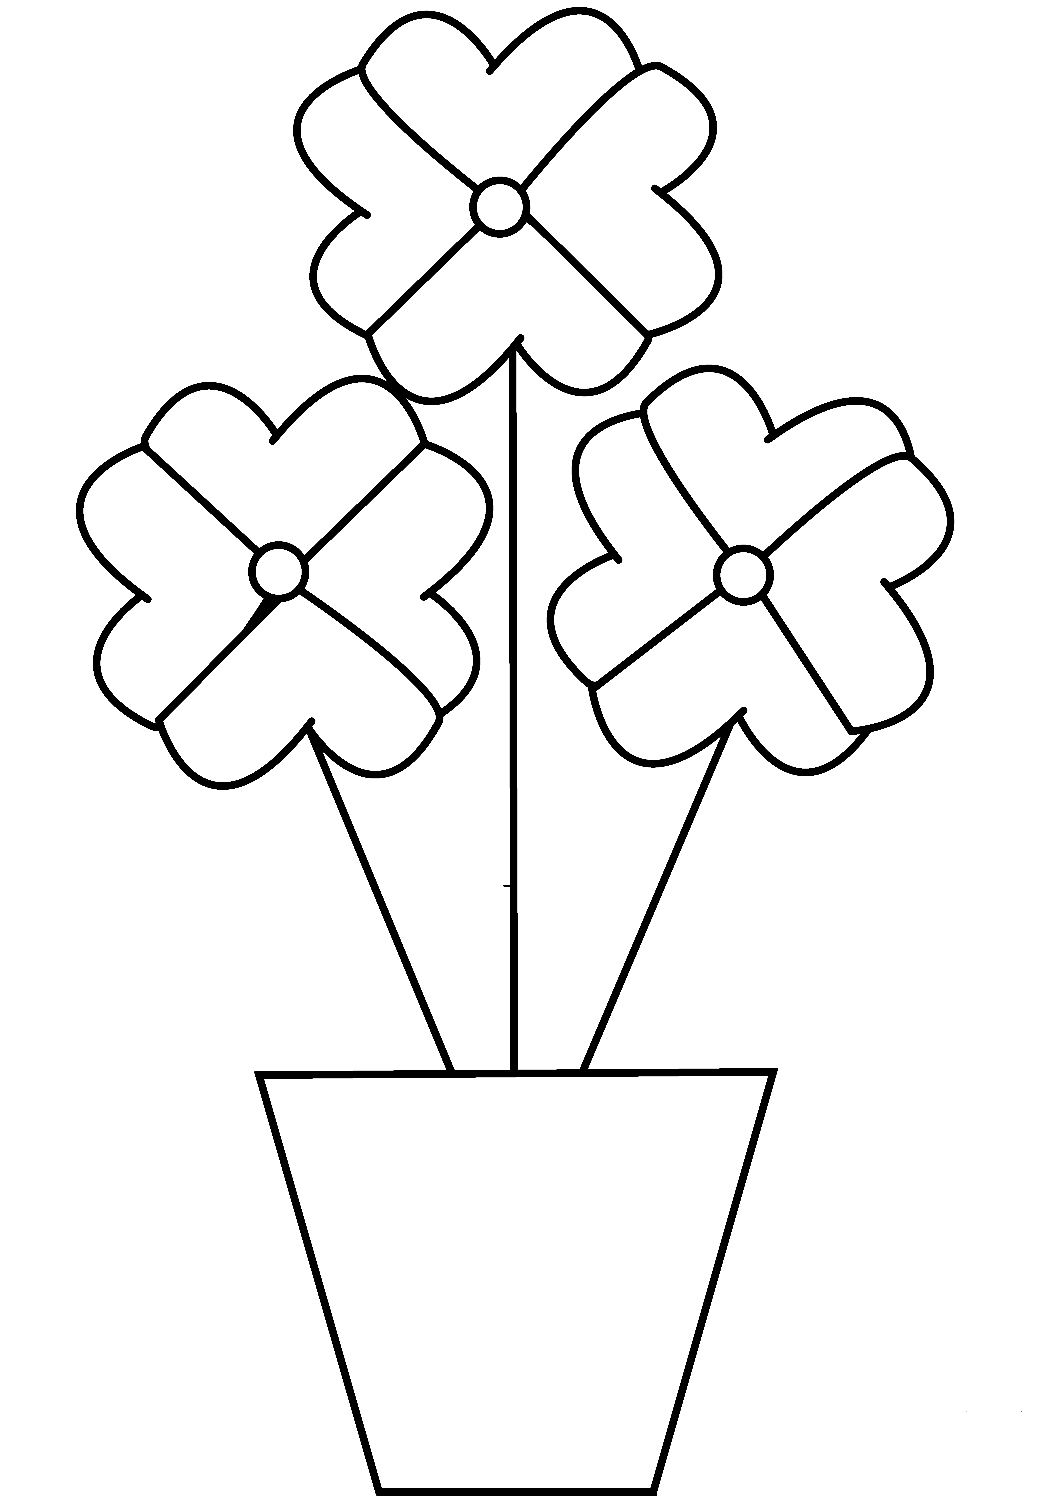 Flower Pot Printable Coloring Page